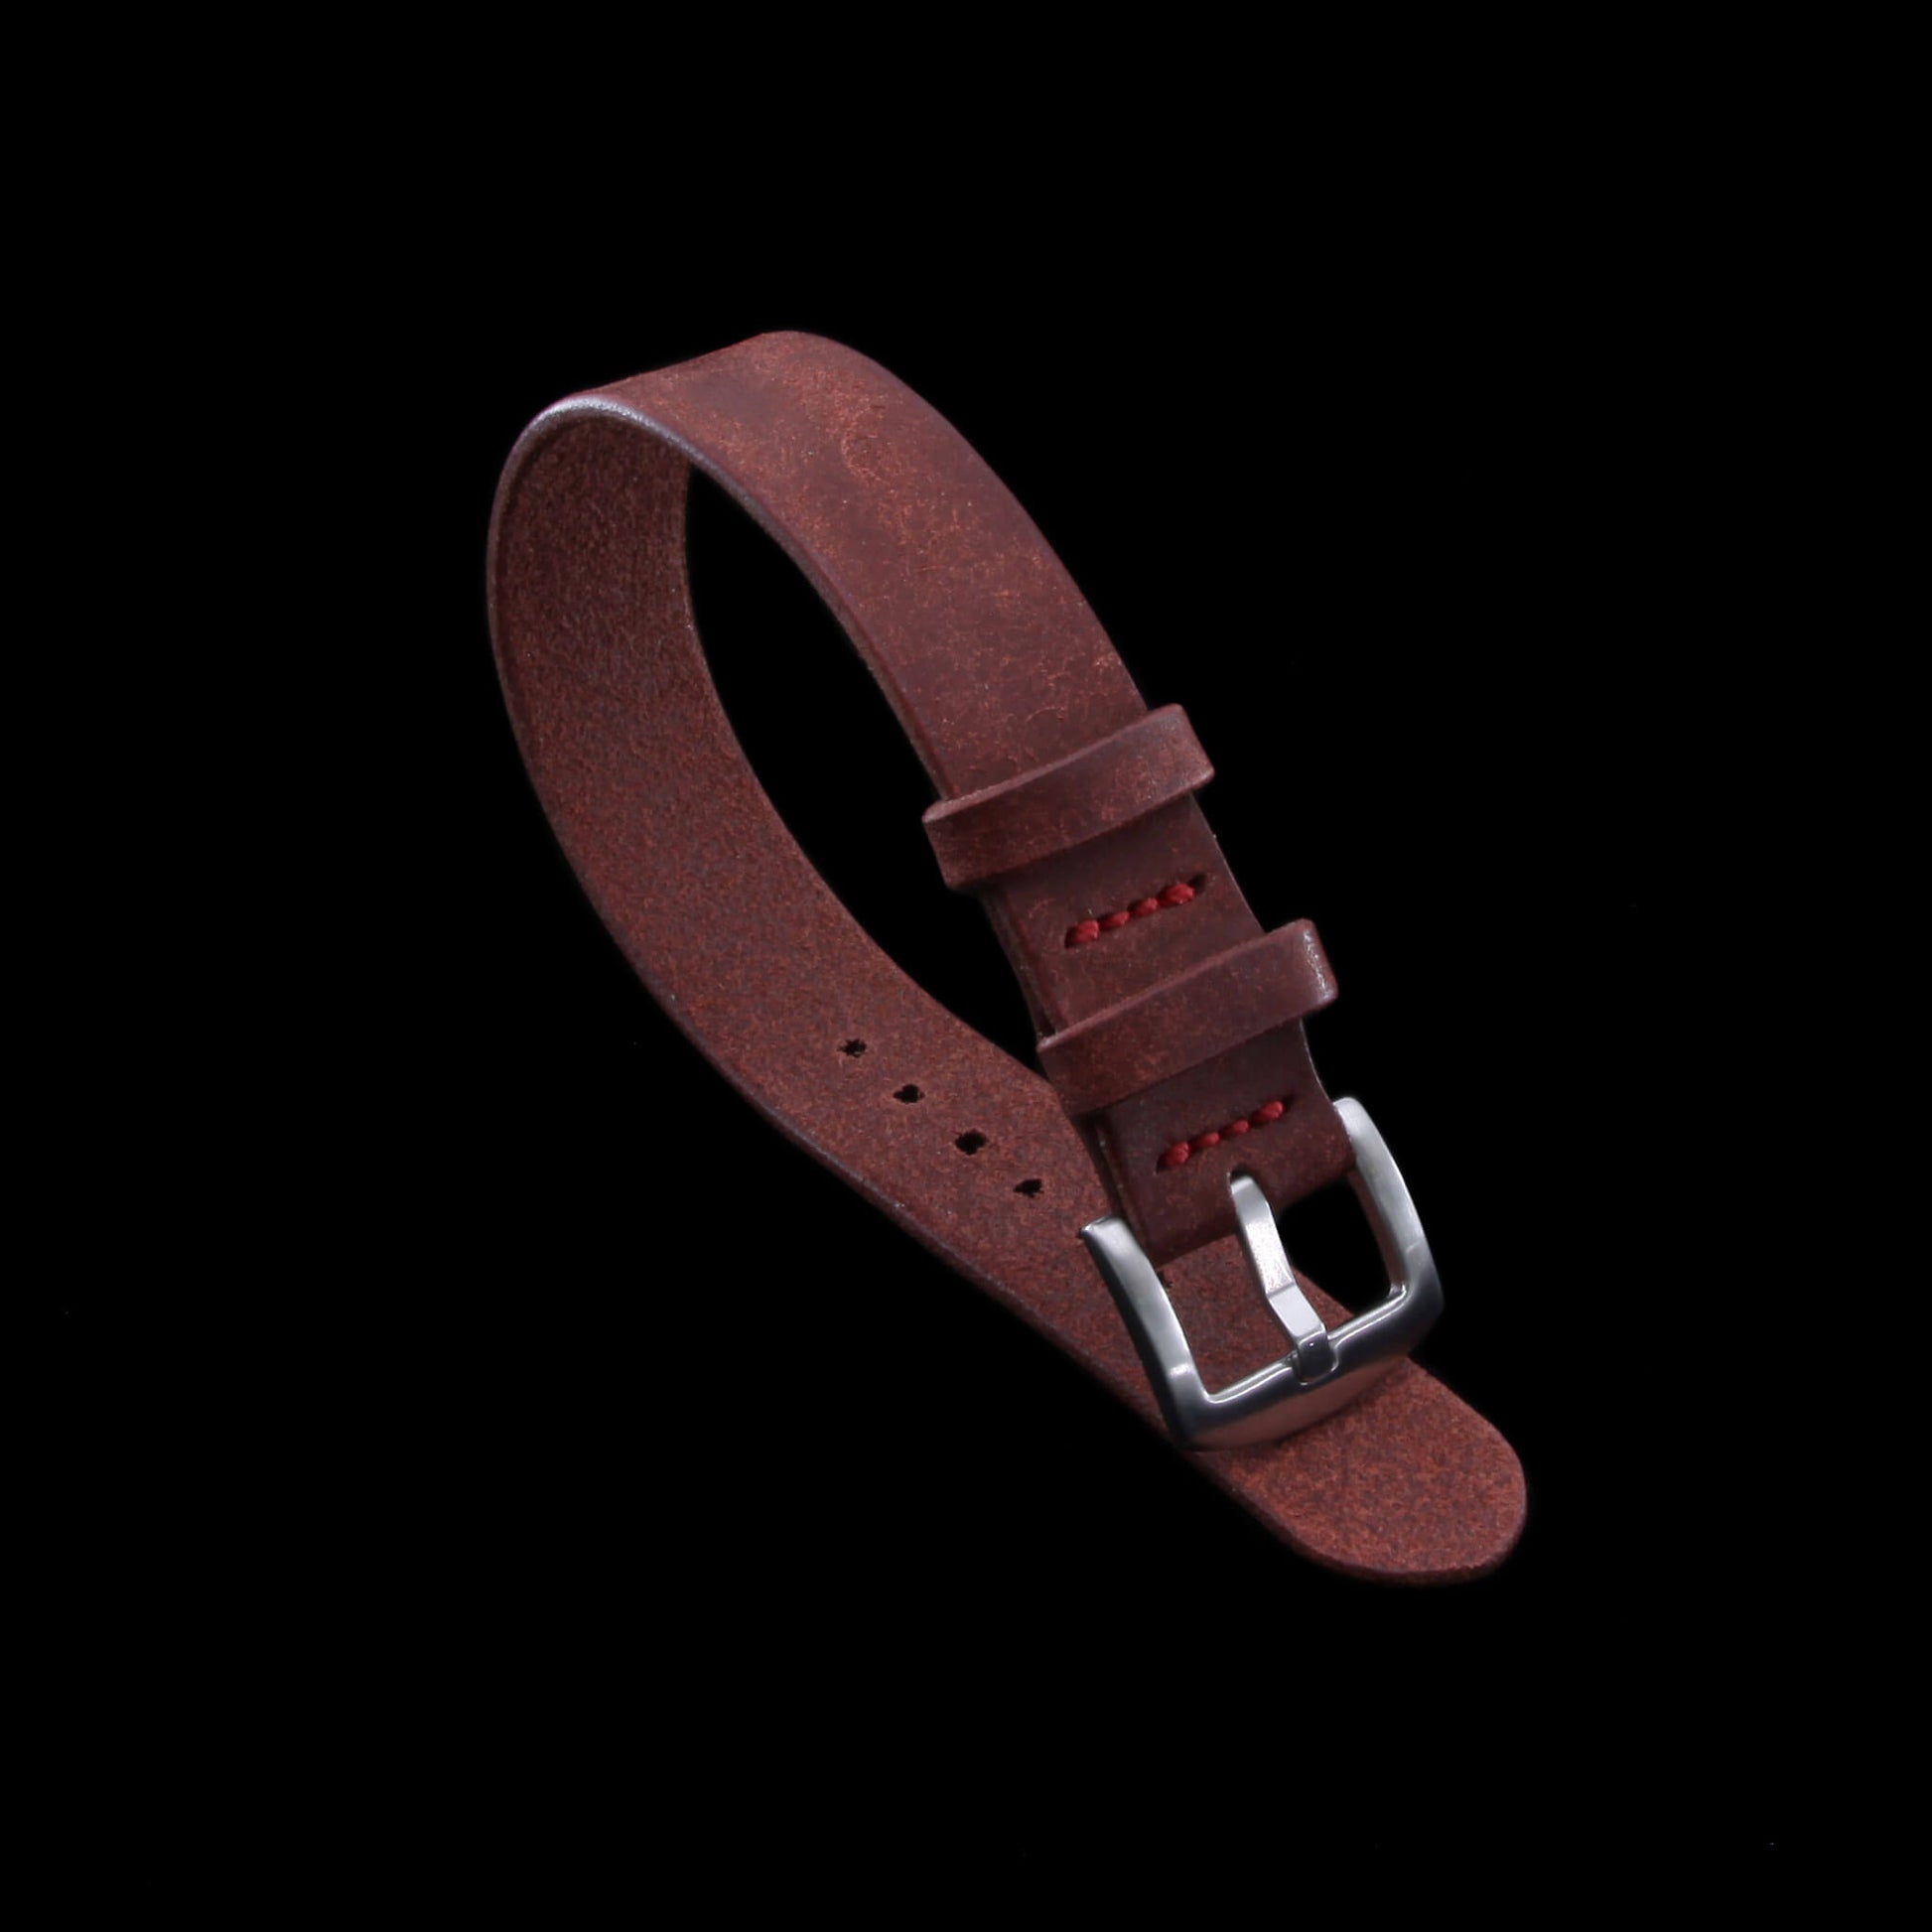 2nd View of  Single Pass Leather Watch Strap, 2-Keeper Pueblo Cocinella, made with full grain Italian veg-tanned leather by Cozy Handmade